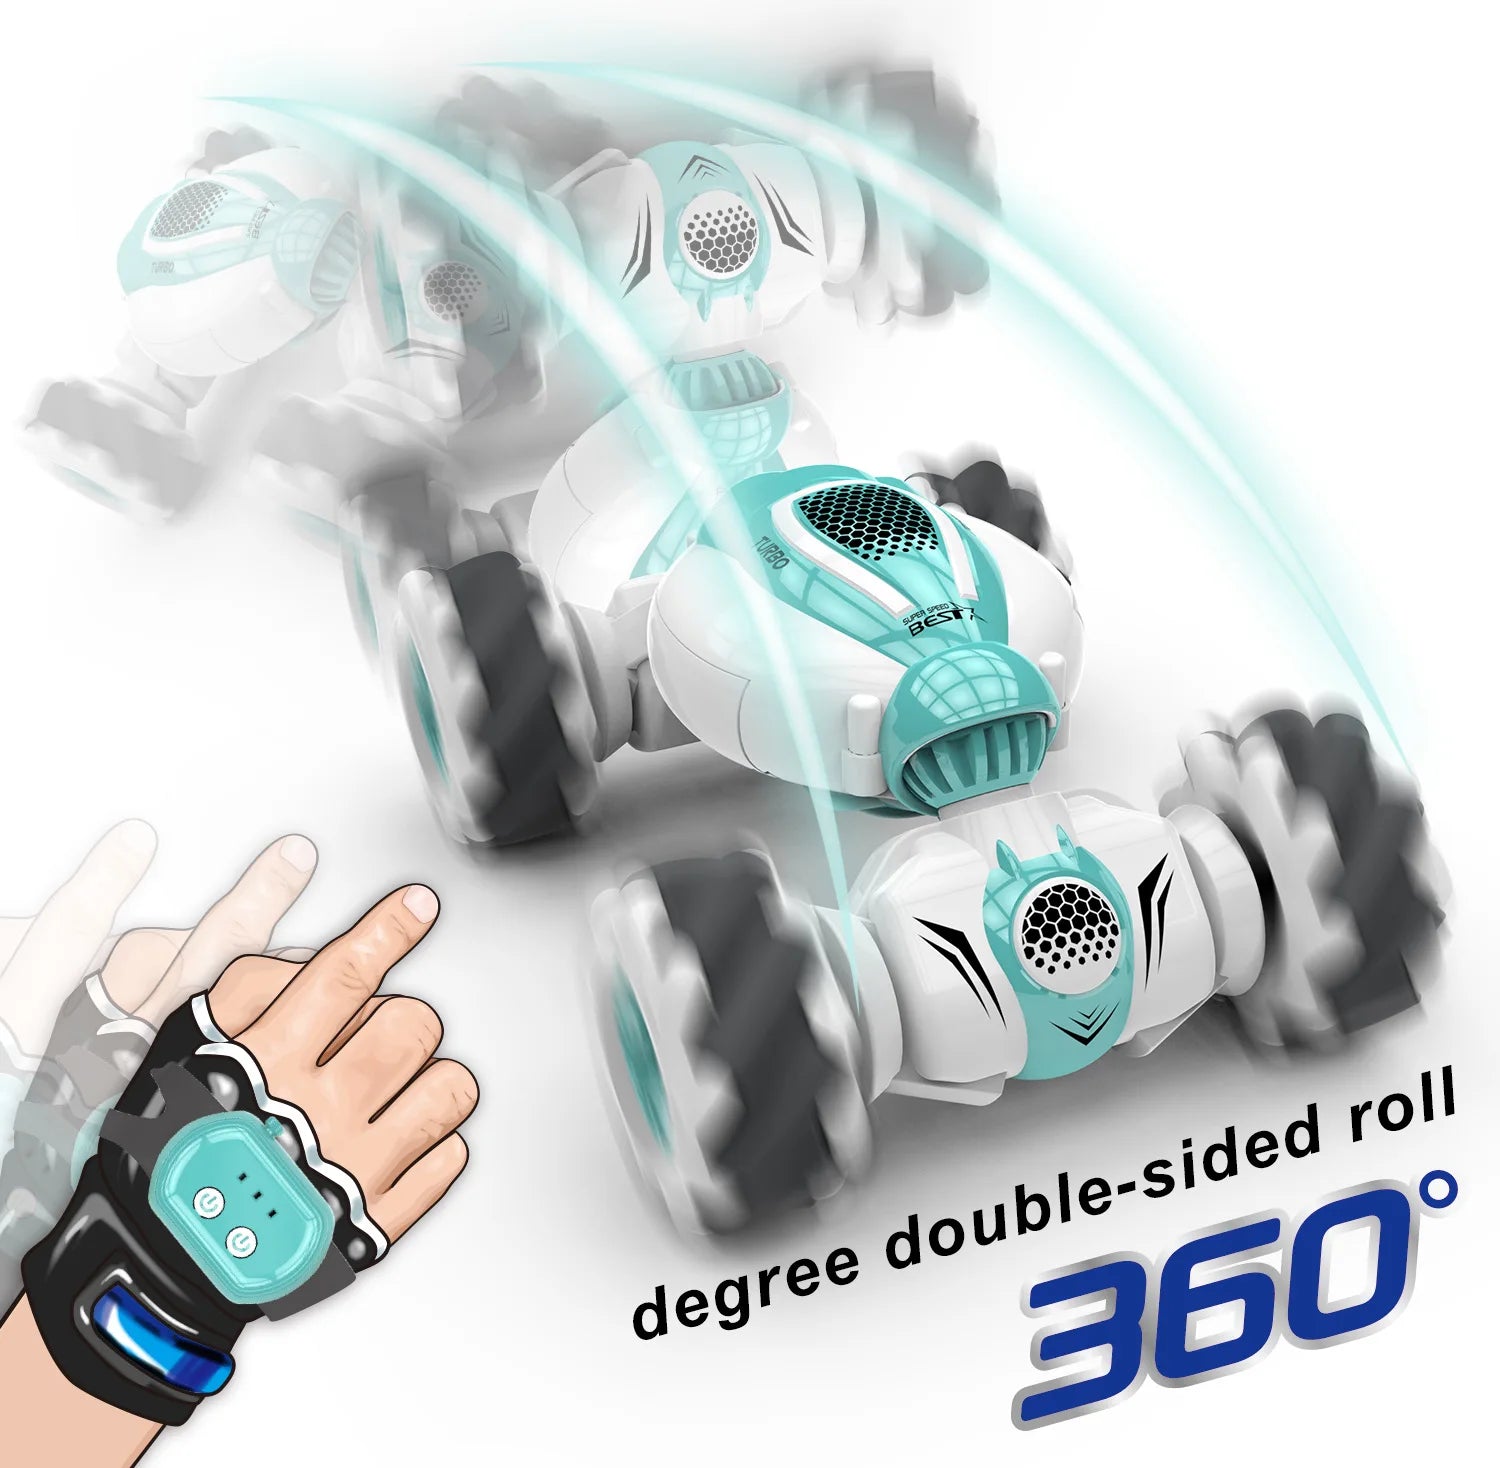 S-012 RC Stunt Car, 22 Se3 8 roll double-sided 360